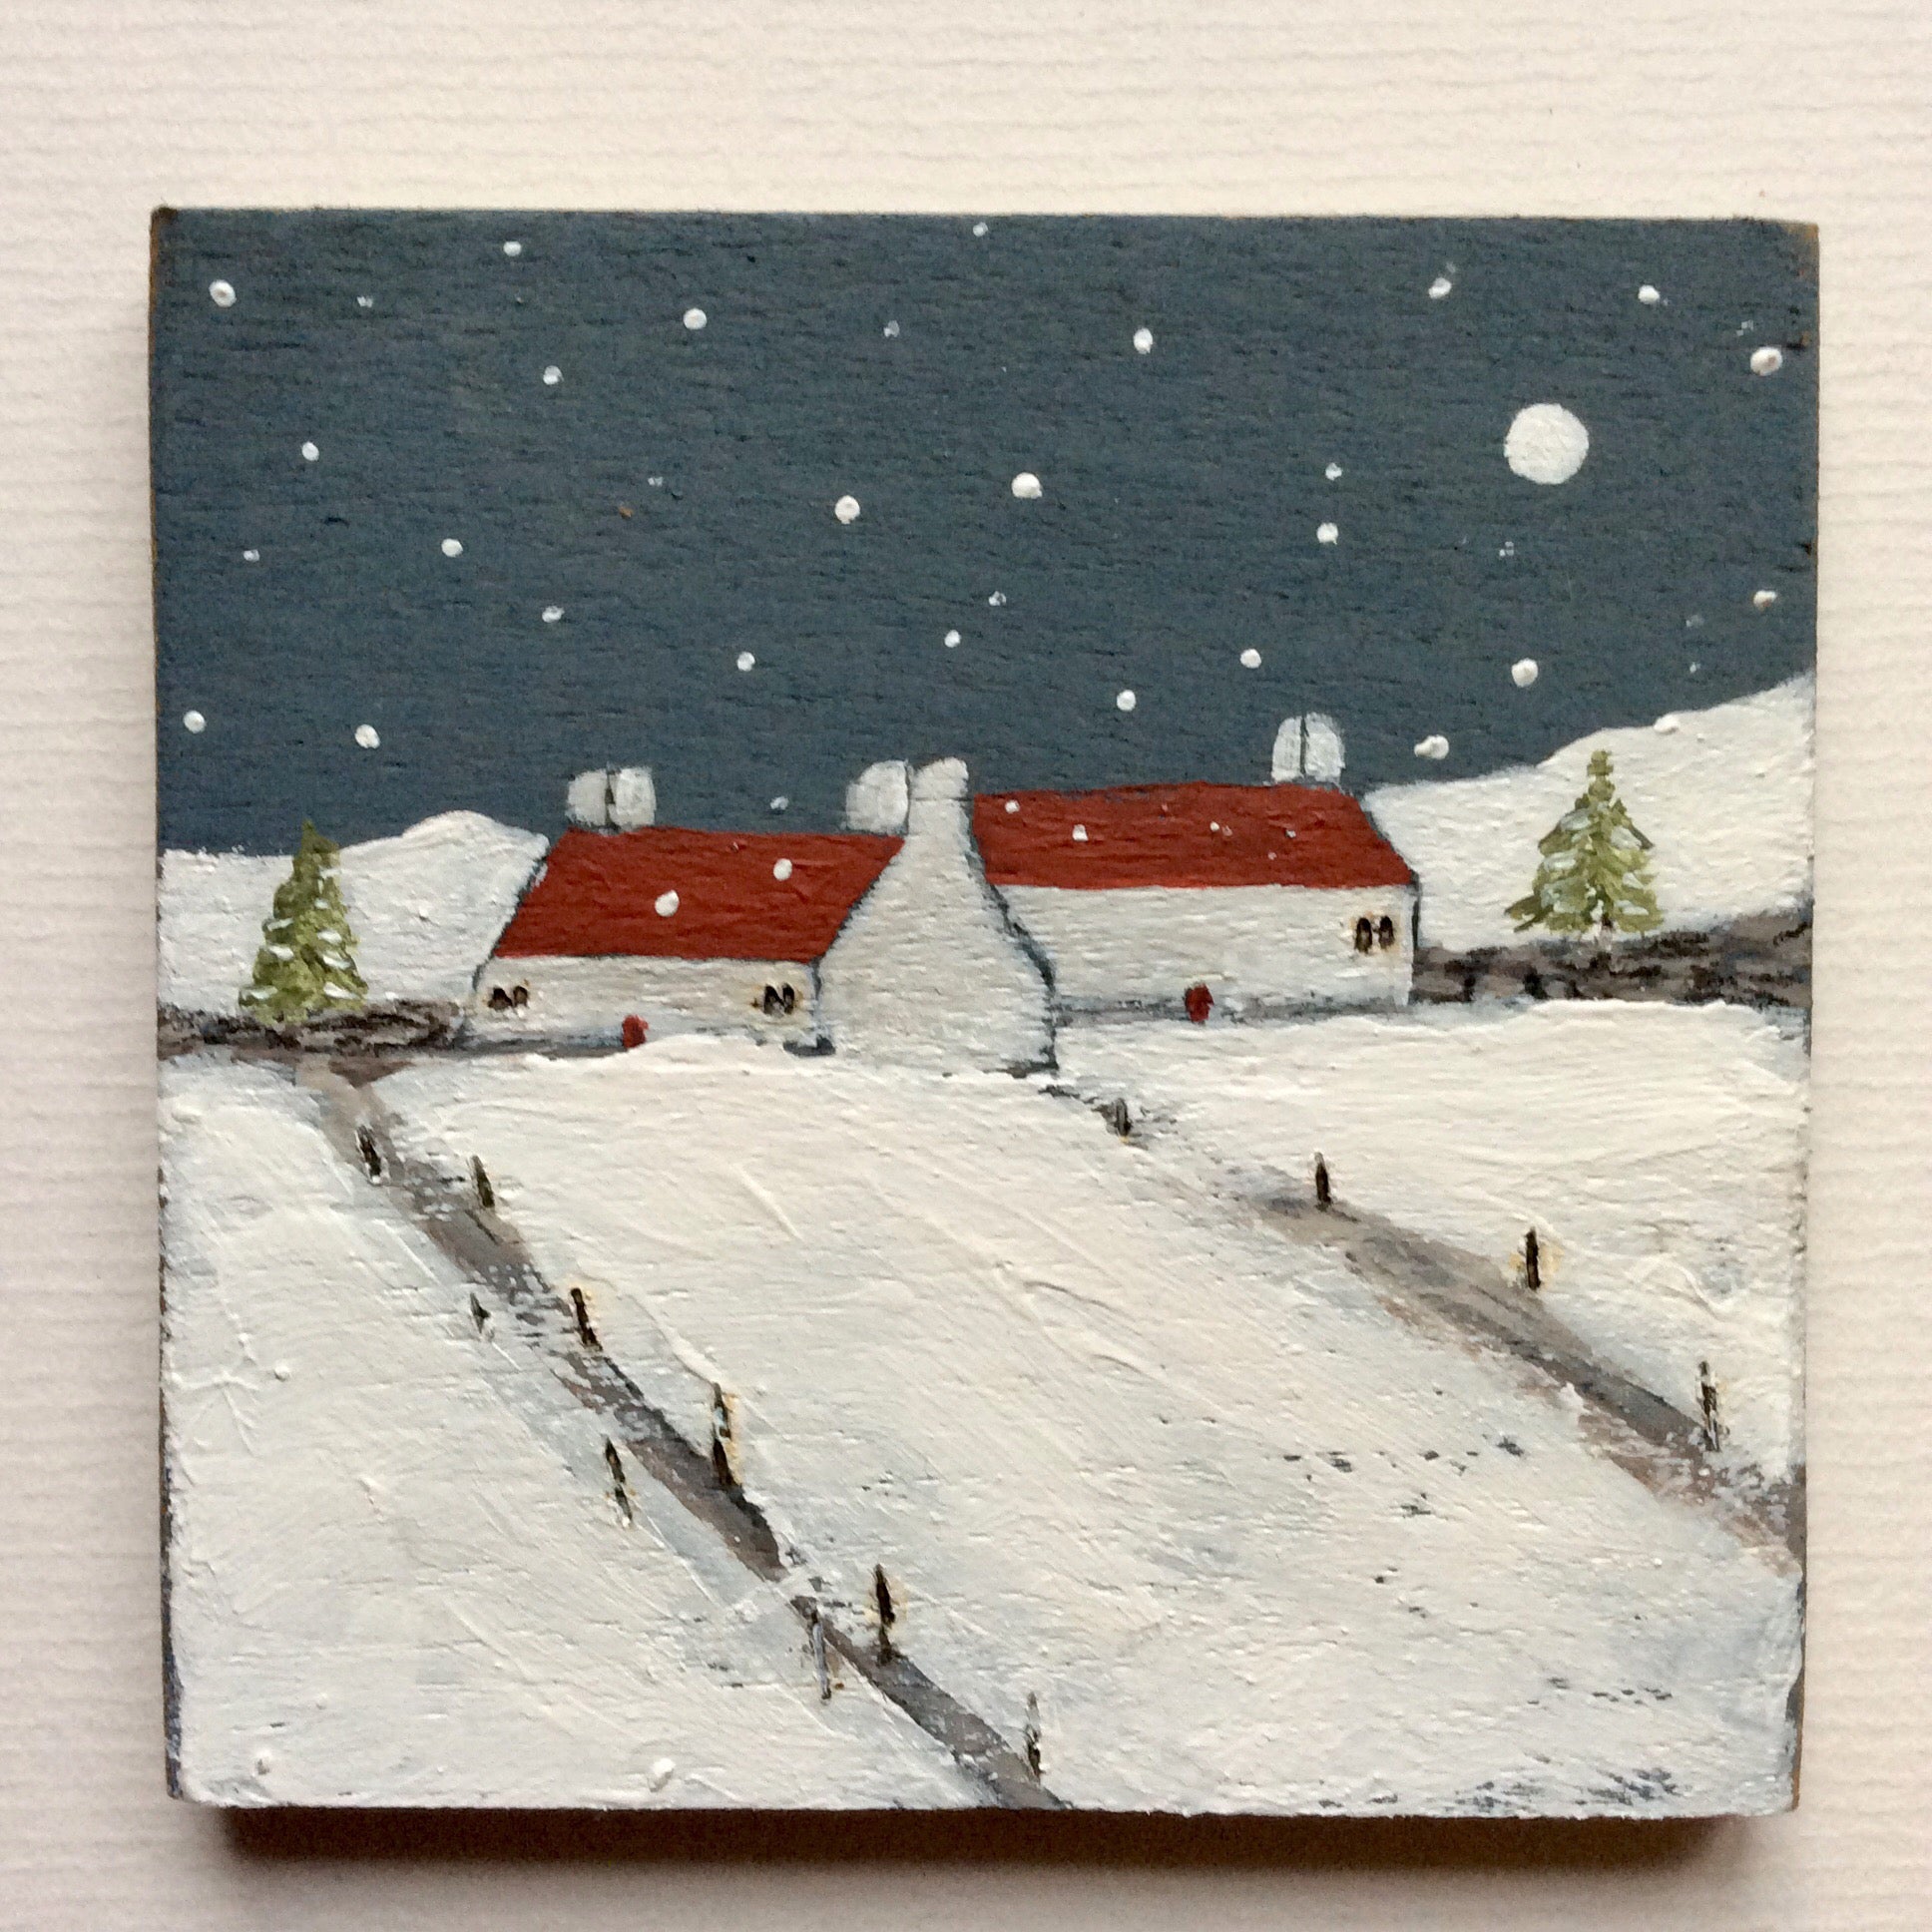 Mixed Media Art on wood By Louise O'Hara - "Winter on the Croft”